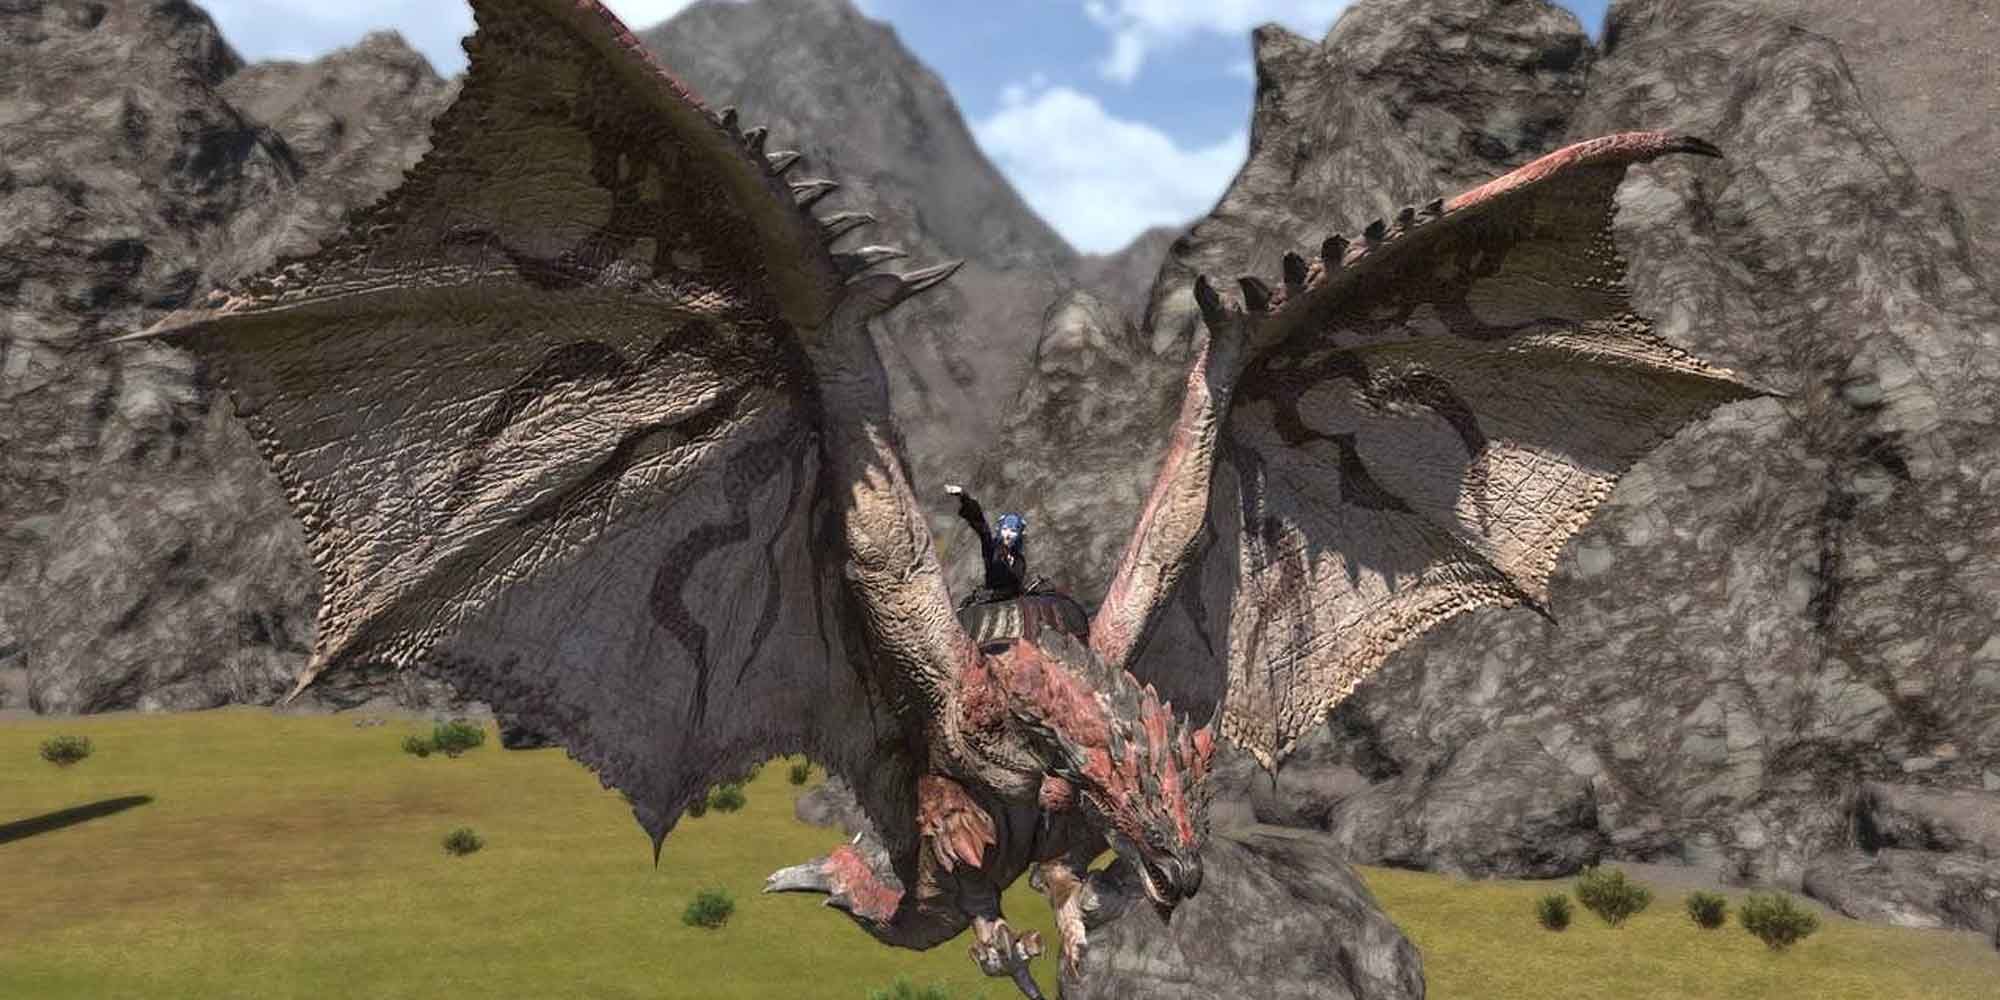 Rathalos is a dragon mount in Final Fantasy 14